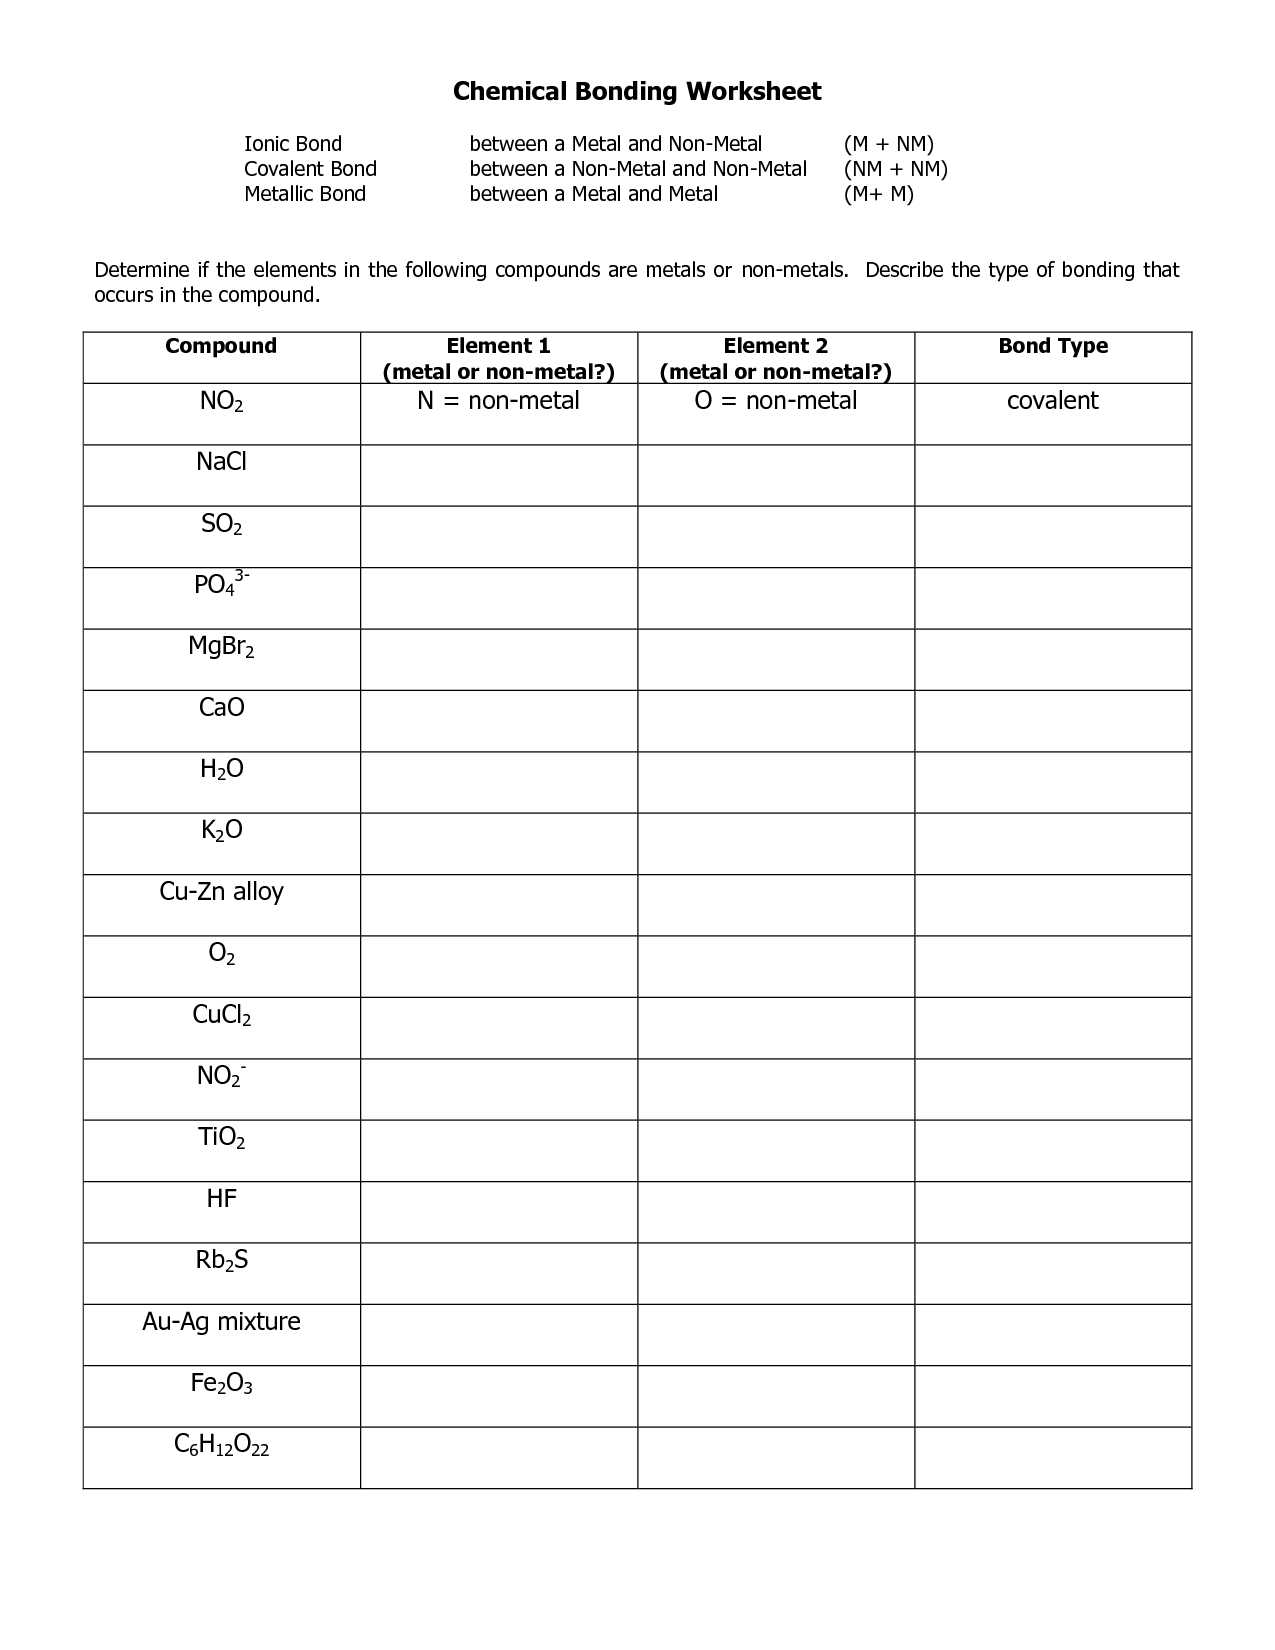 Worksheet Chemical Bonding Ionic and Covalent Answers Also Bonding Basics Ionic Bonds Worksheet Answers Image Collections